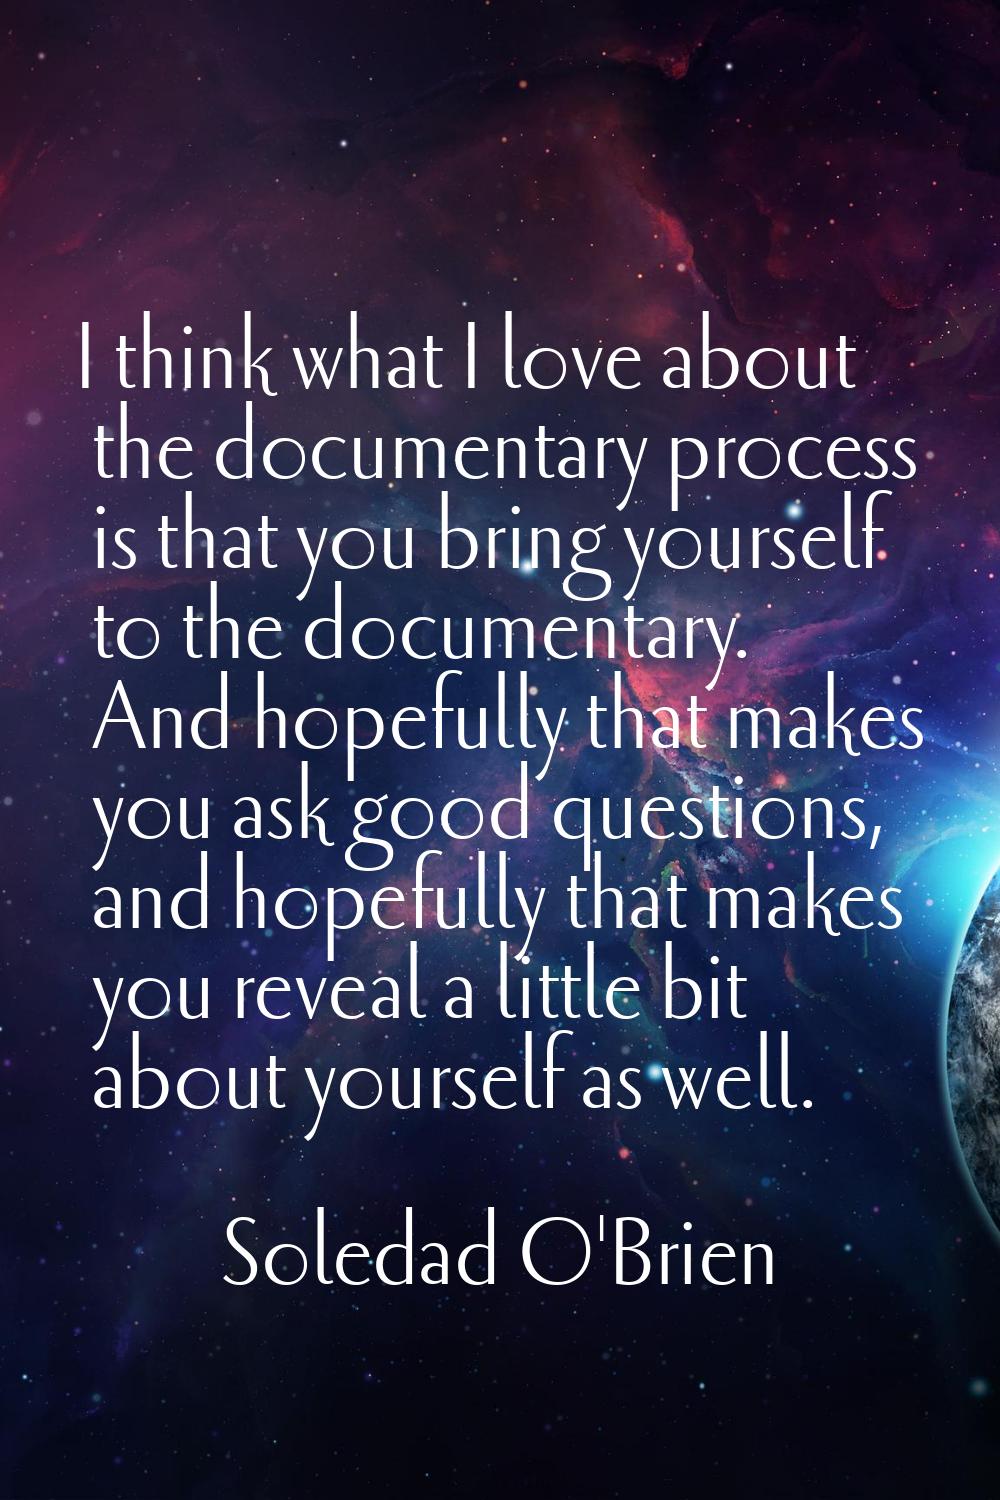 I think what I love about the documentary process is that you bring yourself to the documentary. An